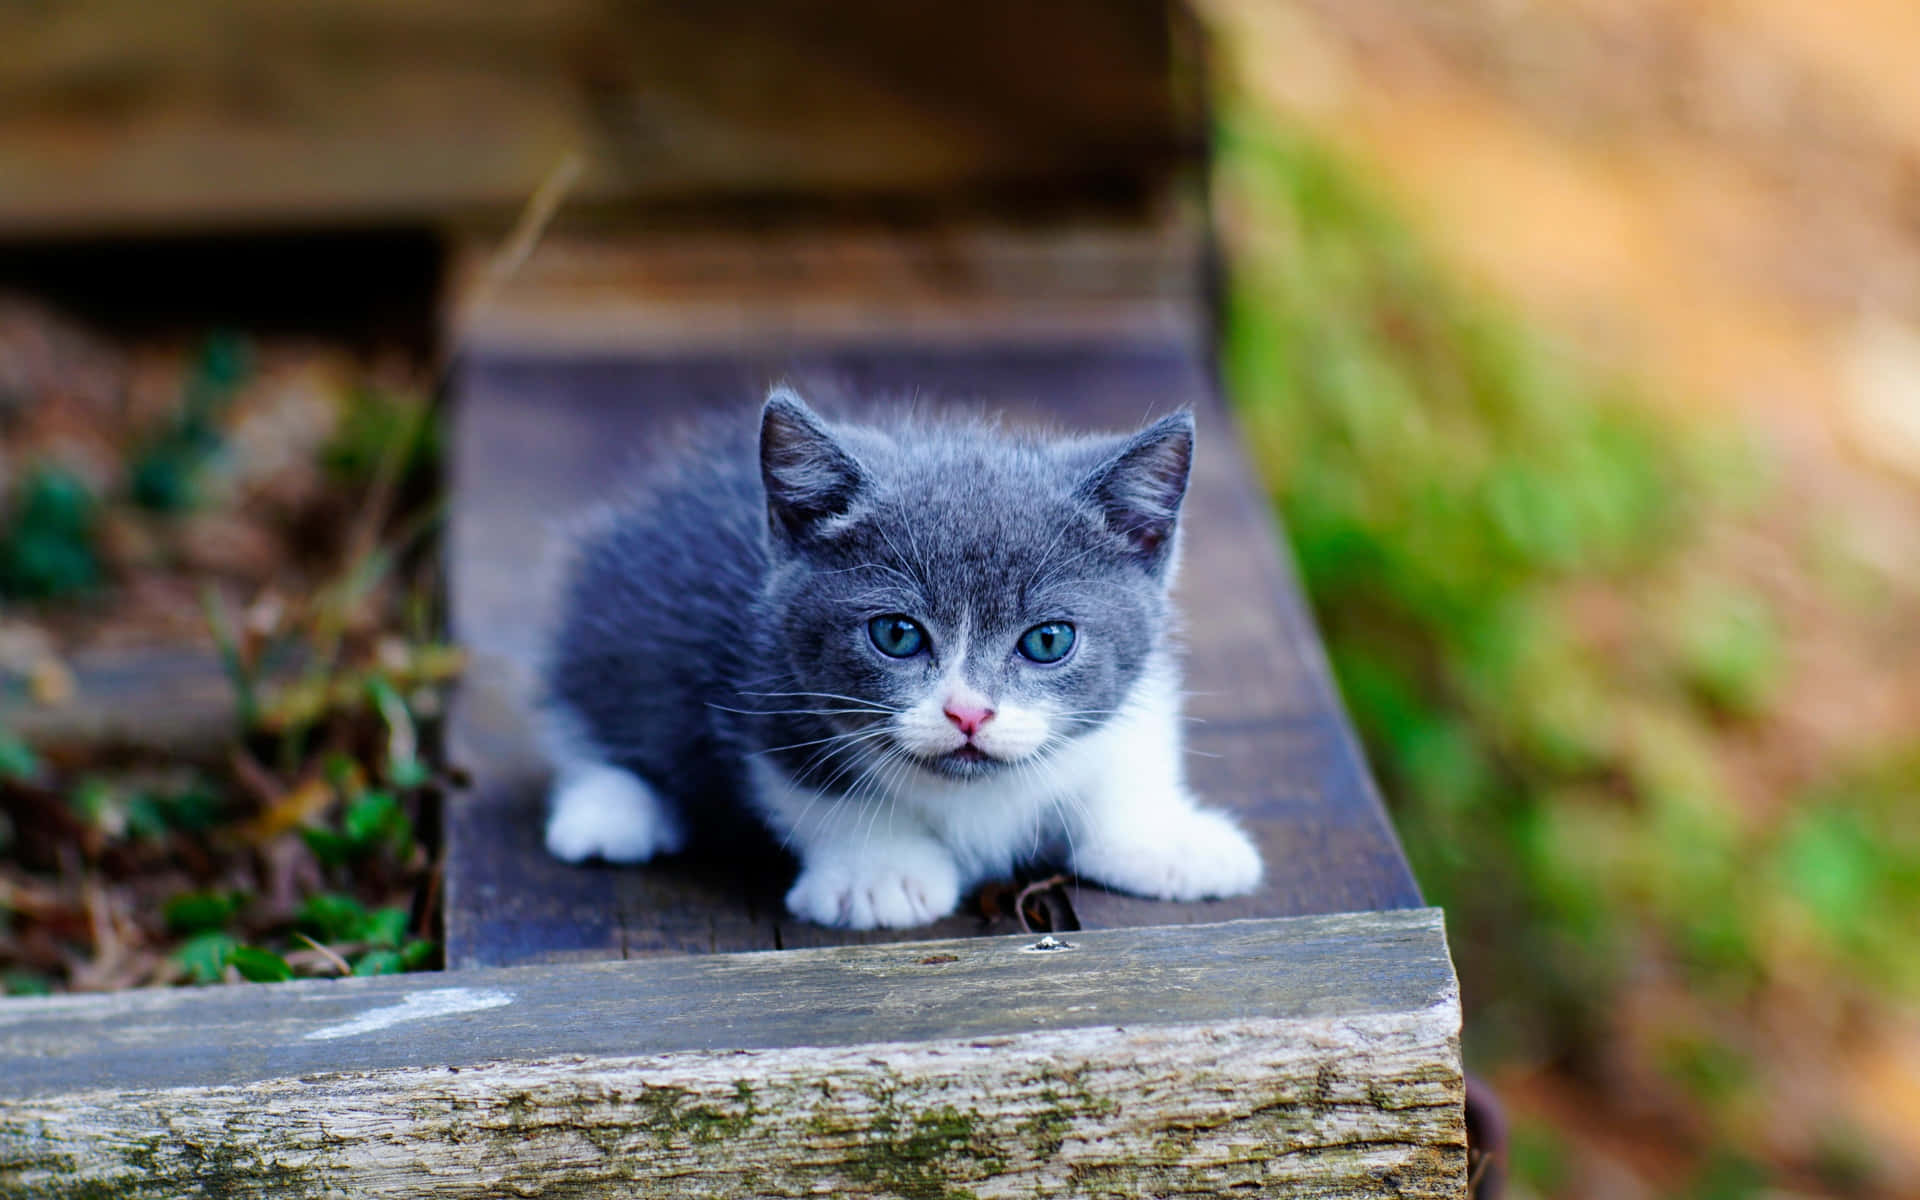 A Gray And White Kitten Is Sitting On A Wooden Bench